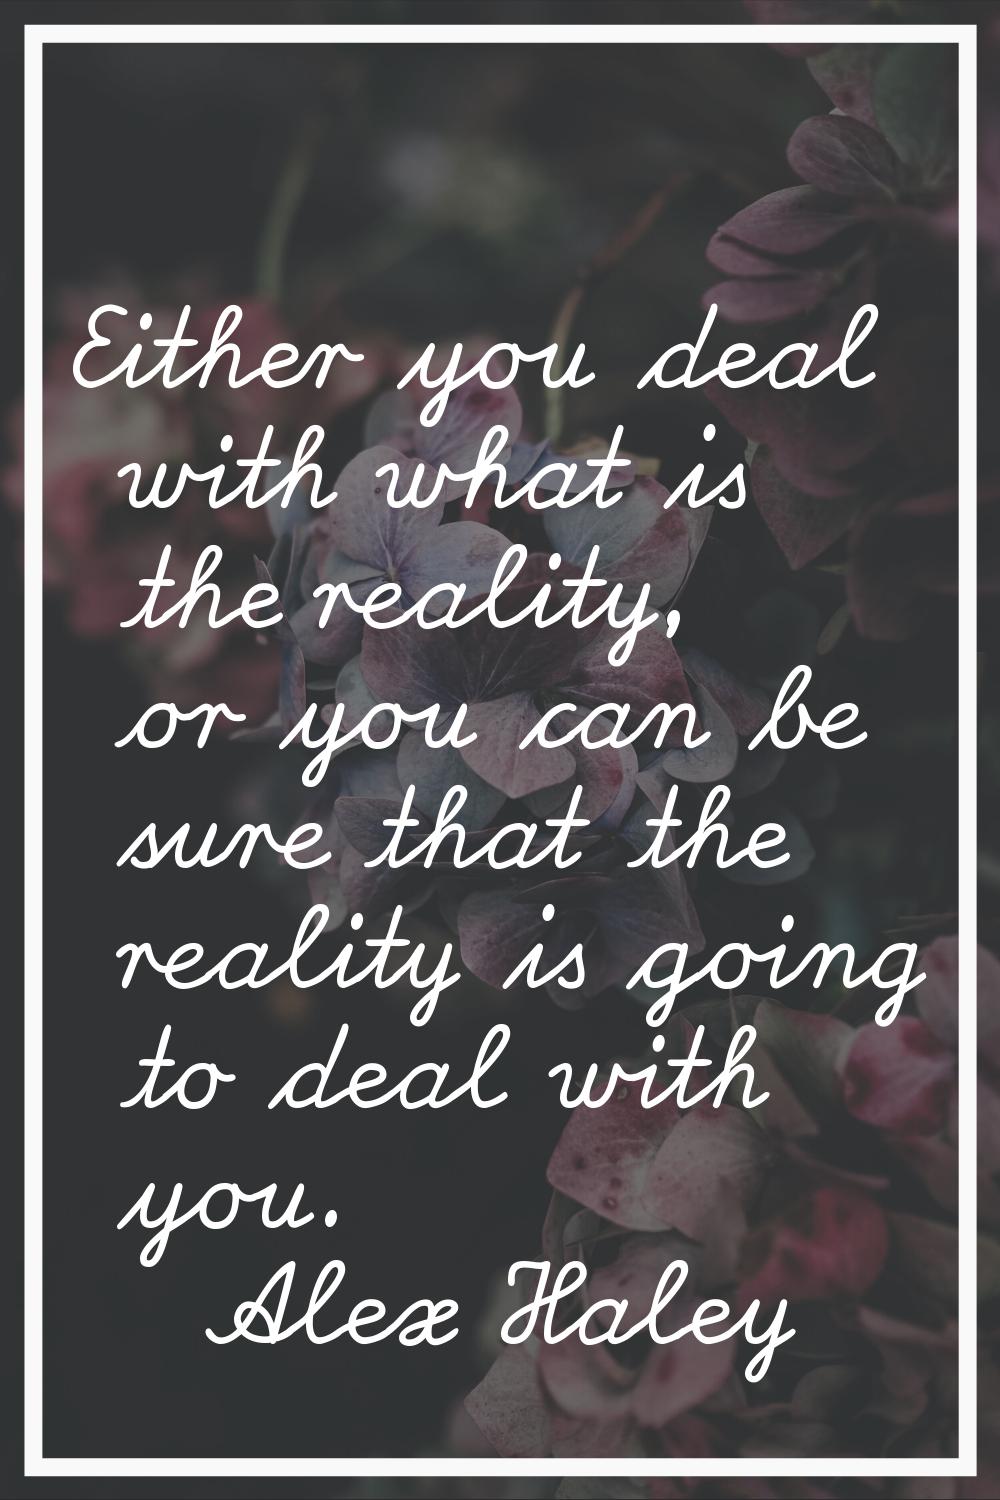 Either you deal with what is the reality, or you can be sure that the reality is going to deal with